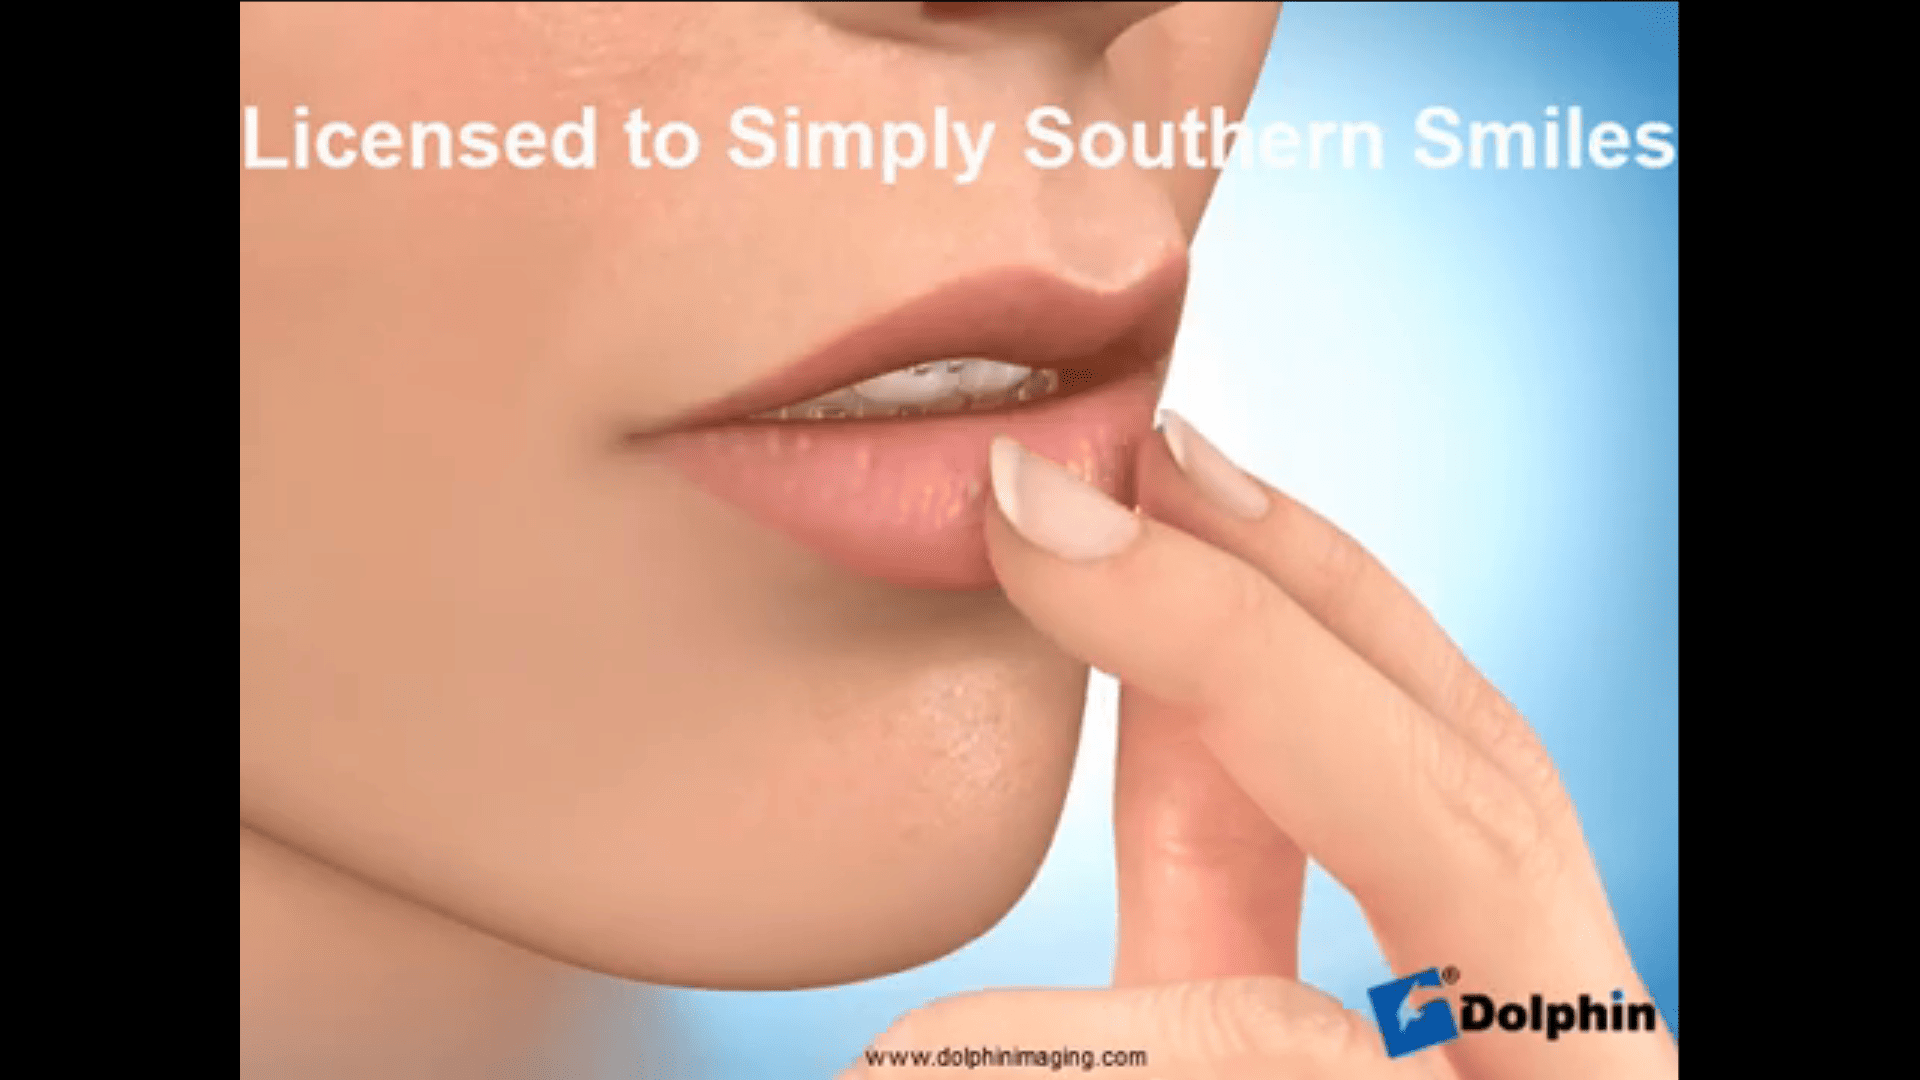 https://simplysouthernsmiles.com/wp-content/uploads/2022/07/wax.png